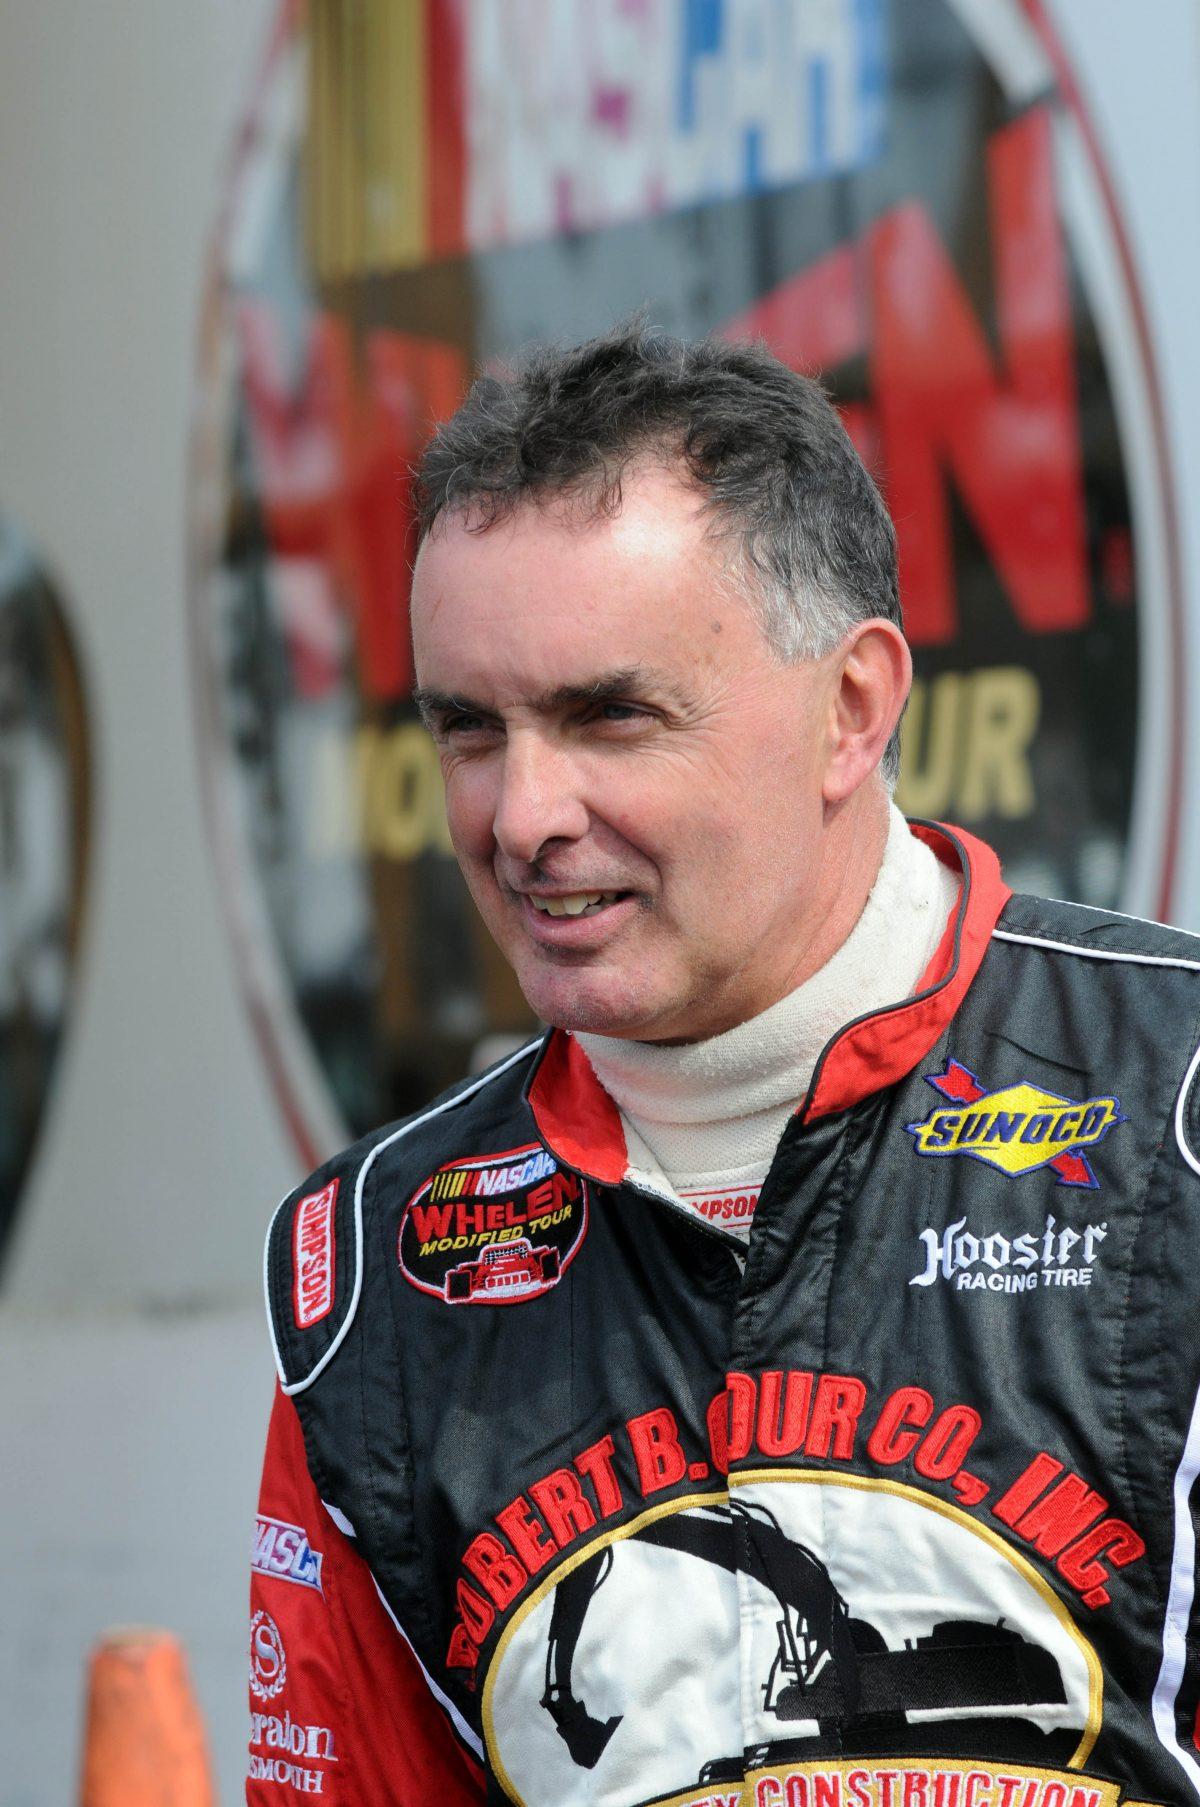 Mike Stefanik, a NASCAR legend, in the pits during practice and qualifying day at the Sunoco World Series 150 at Thompson Speedway in Connecticut on Oct. 19, 2013. (Darren McCollester/Getty Images for NASCAR)